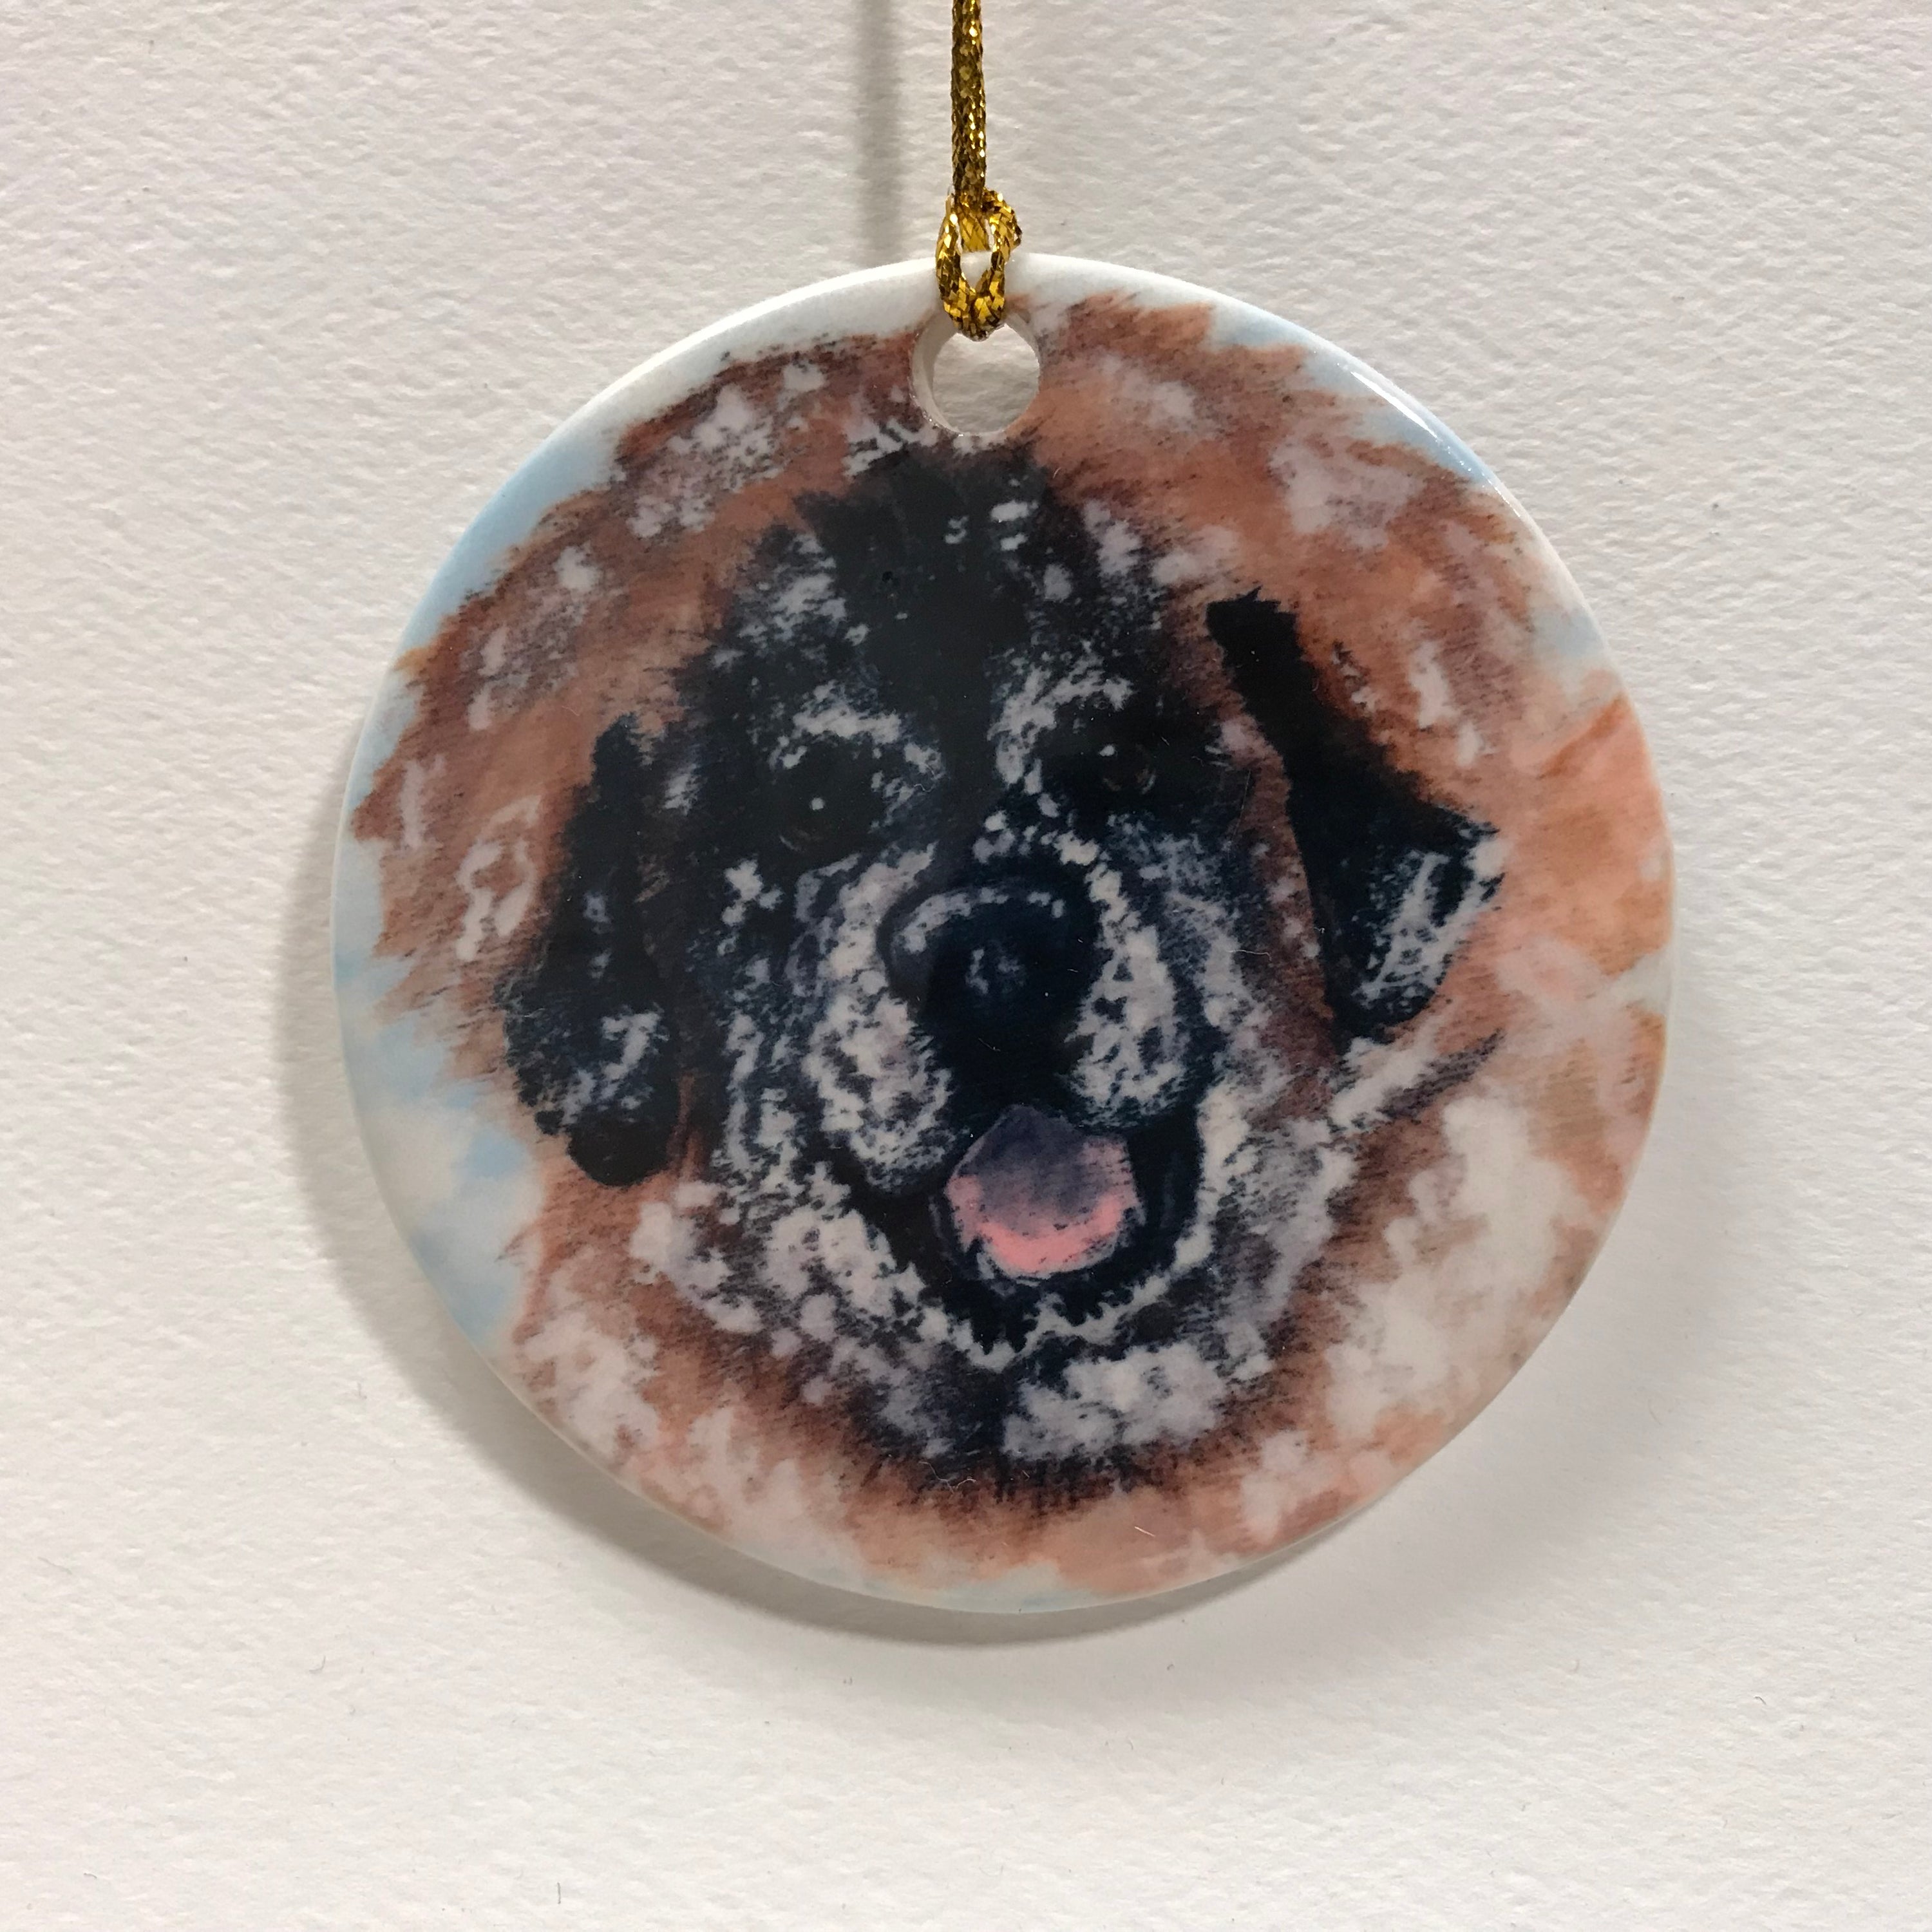 "Snow Covered, leonberger ornament"